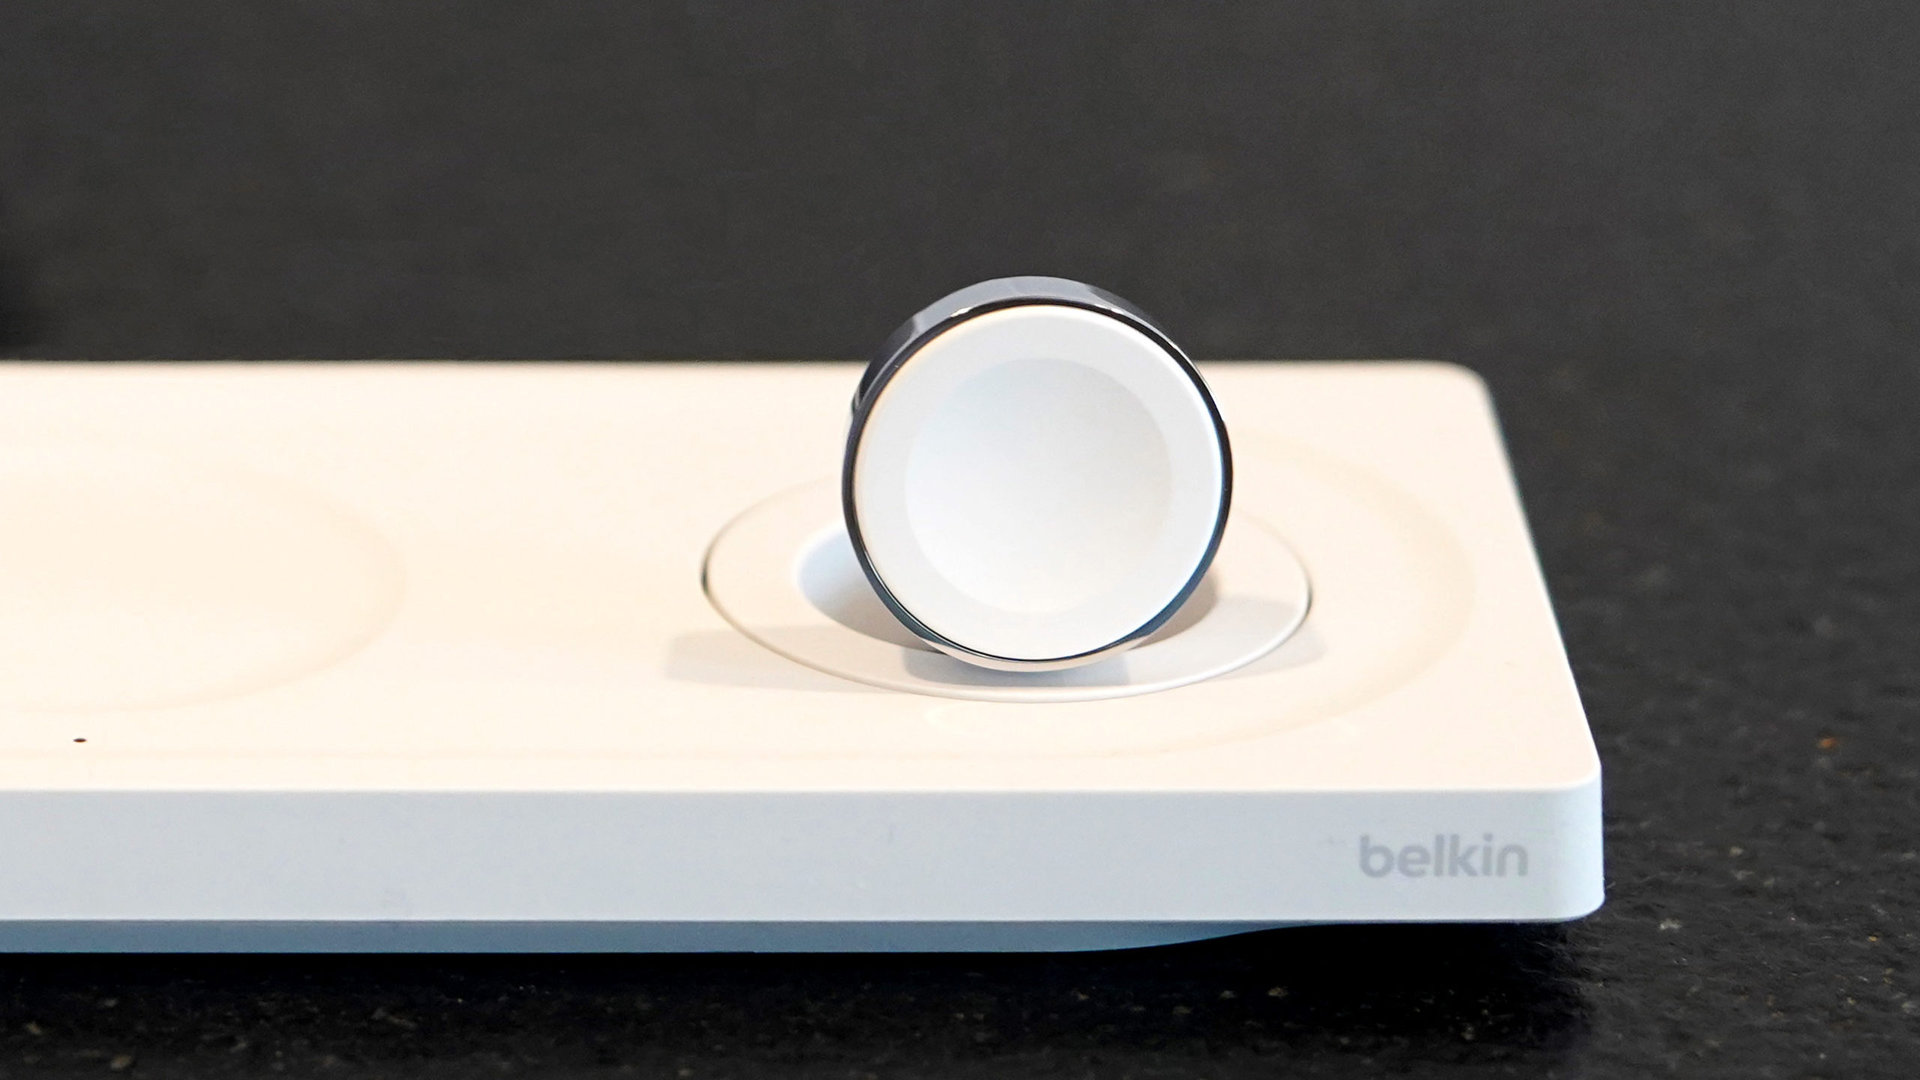 Metallic details elevated the Belkin BoostCharge Pro 3-in-1 Wireless Charger